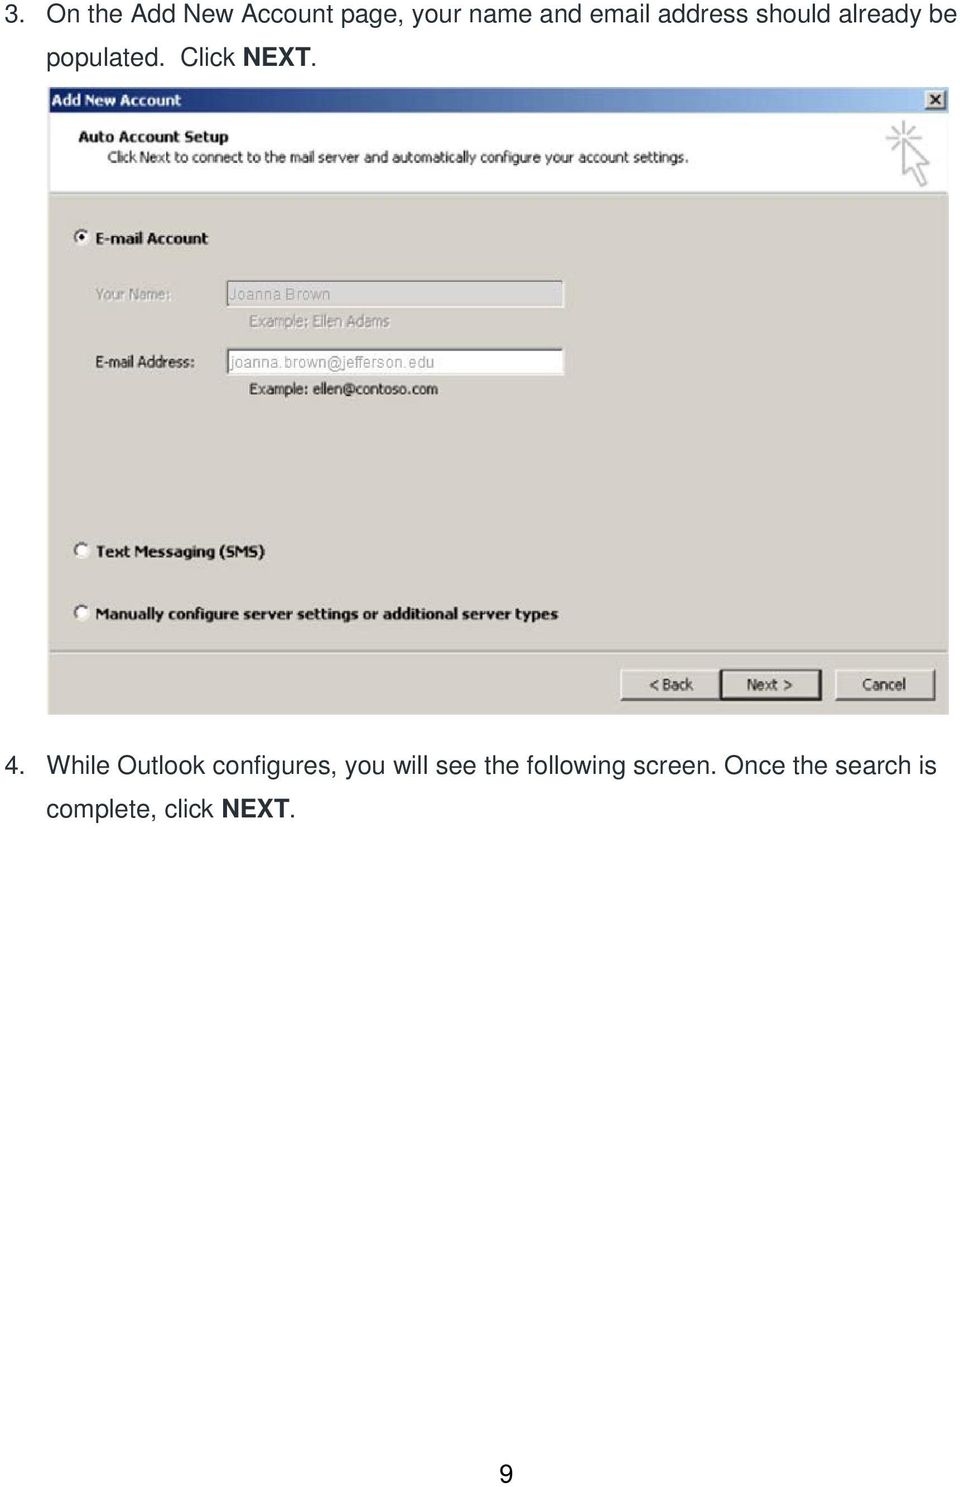 While Outlook configures, you will see the